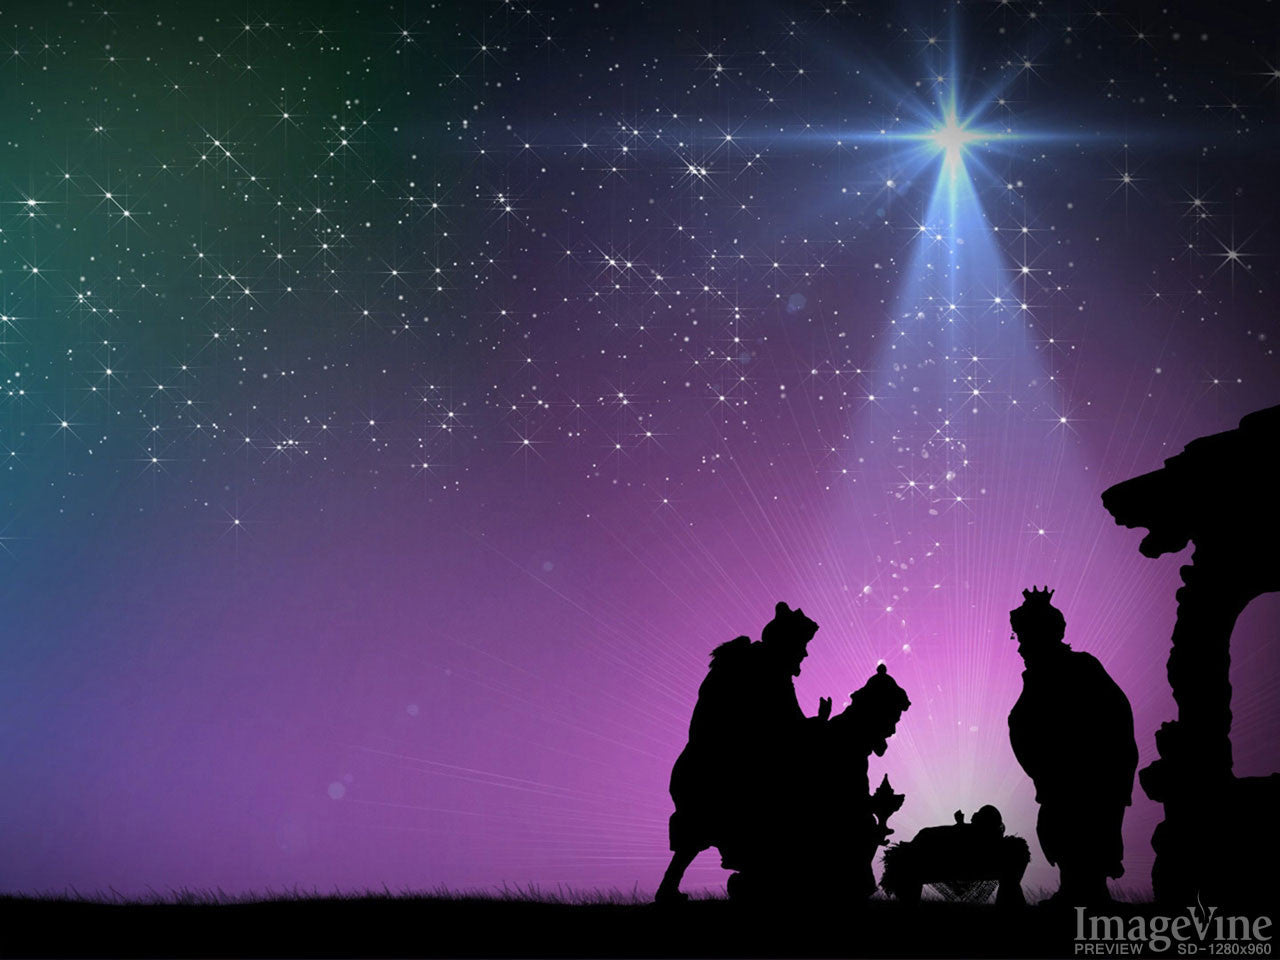 The Christmas Story Backgrounds – ImageVine